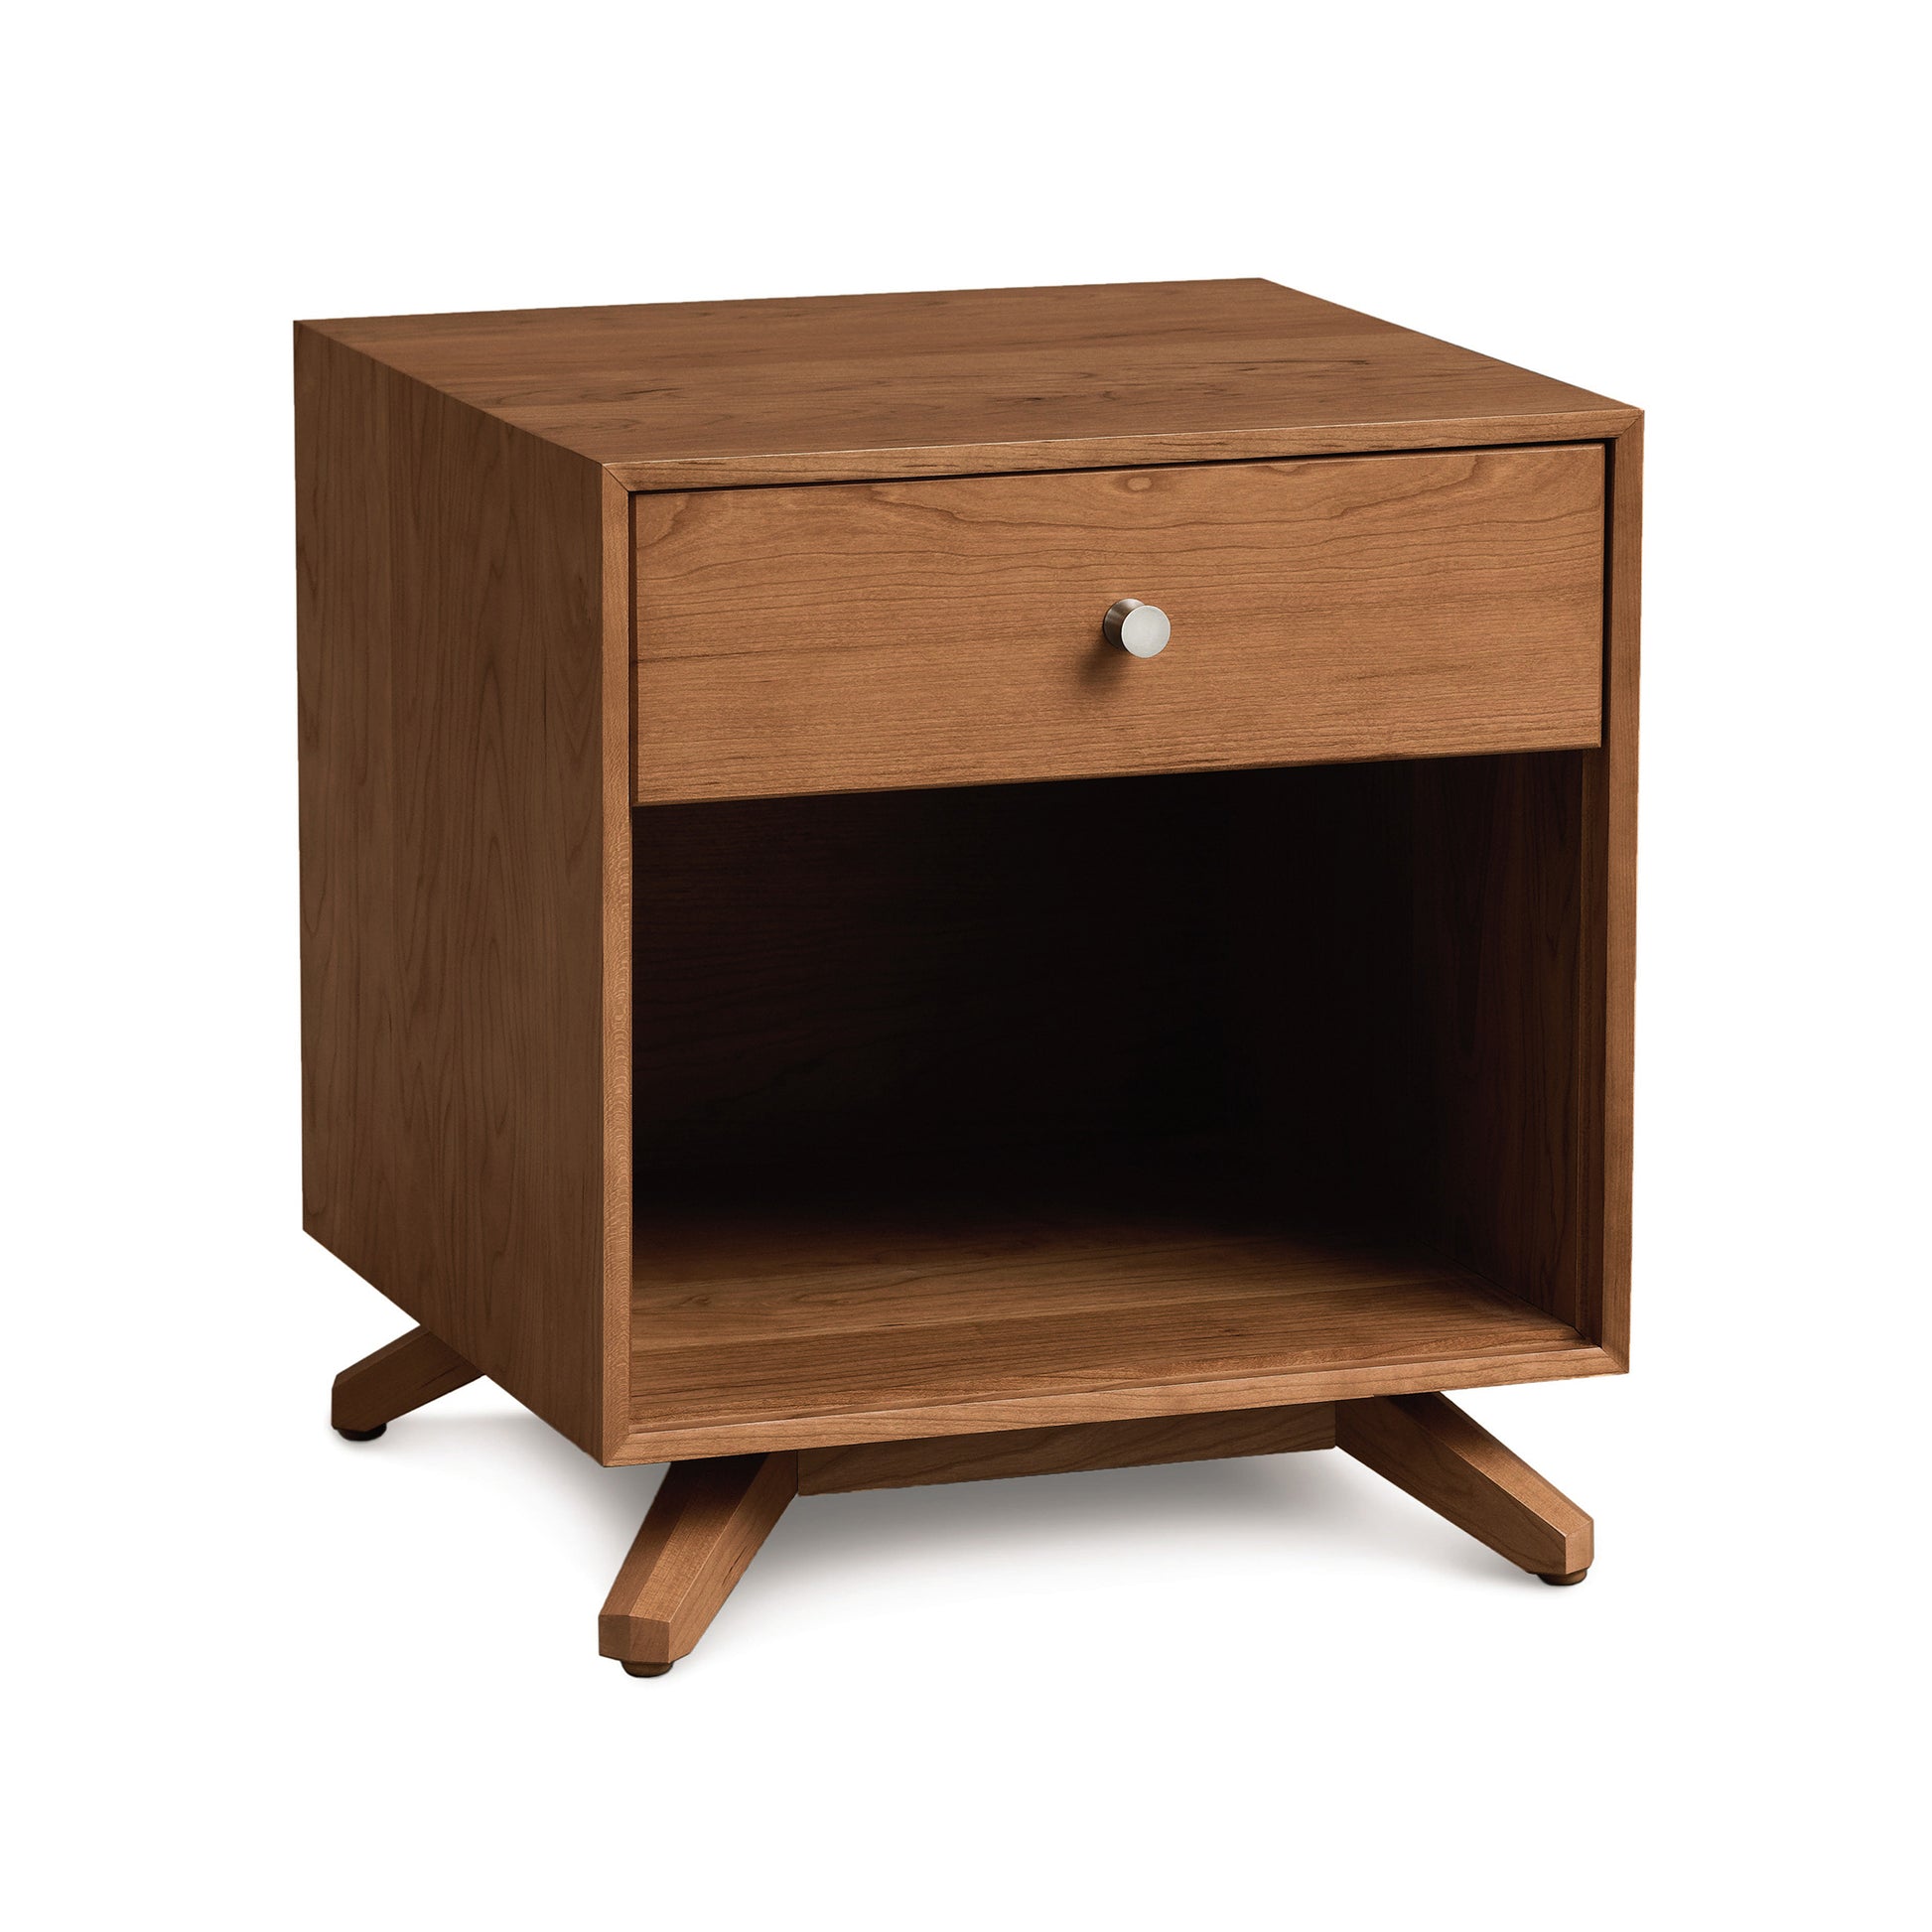 The Astrid 1-Drawer Enclosed Shelf Nightstand by Copeland Furniture is a compact and stylish piece of contemporary furniture. Handcrafted in Vermont, this small wooden nightstand features a convenient drawer.